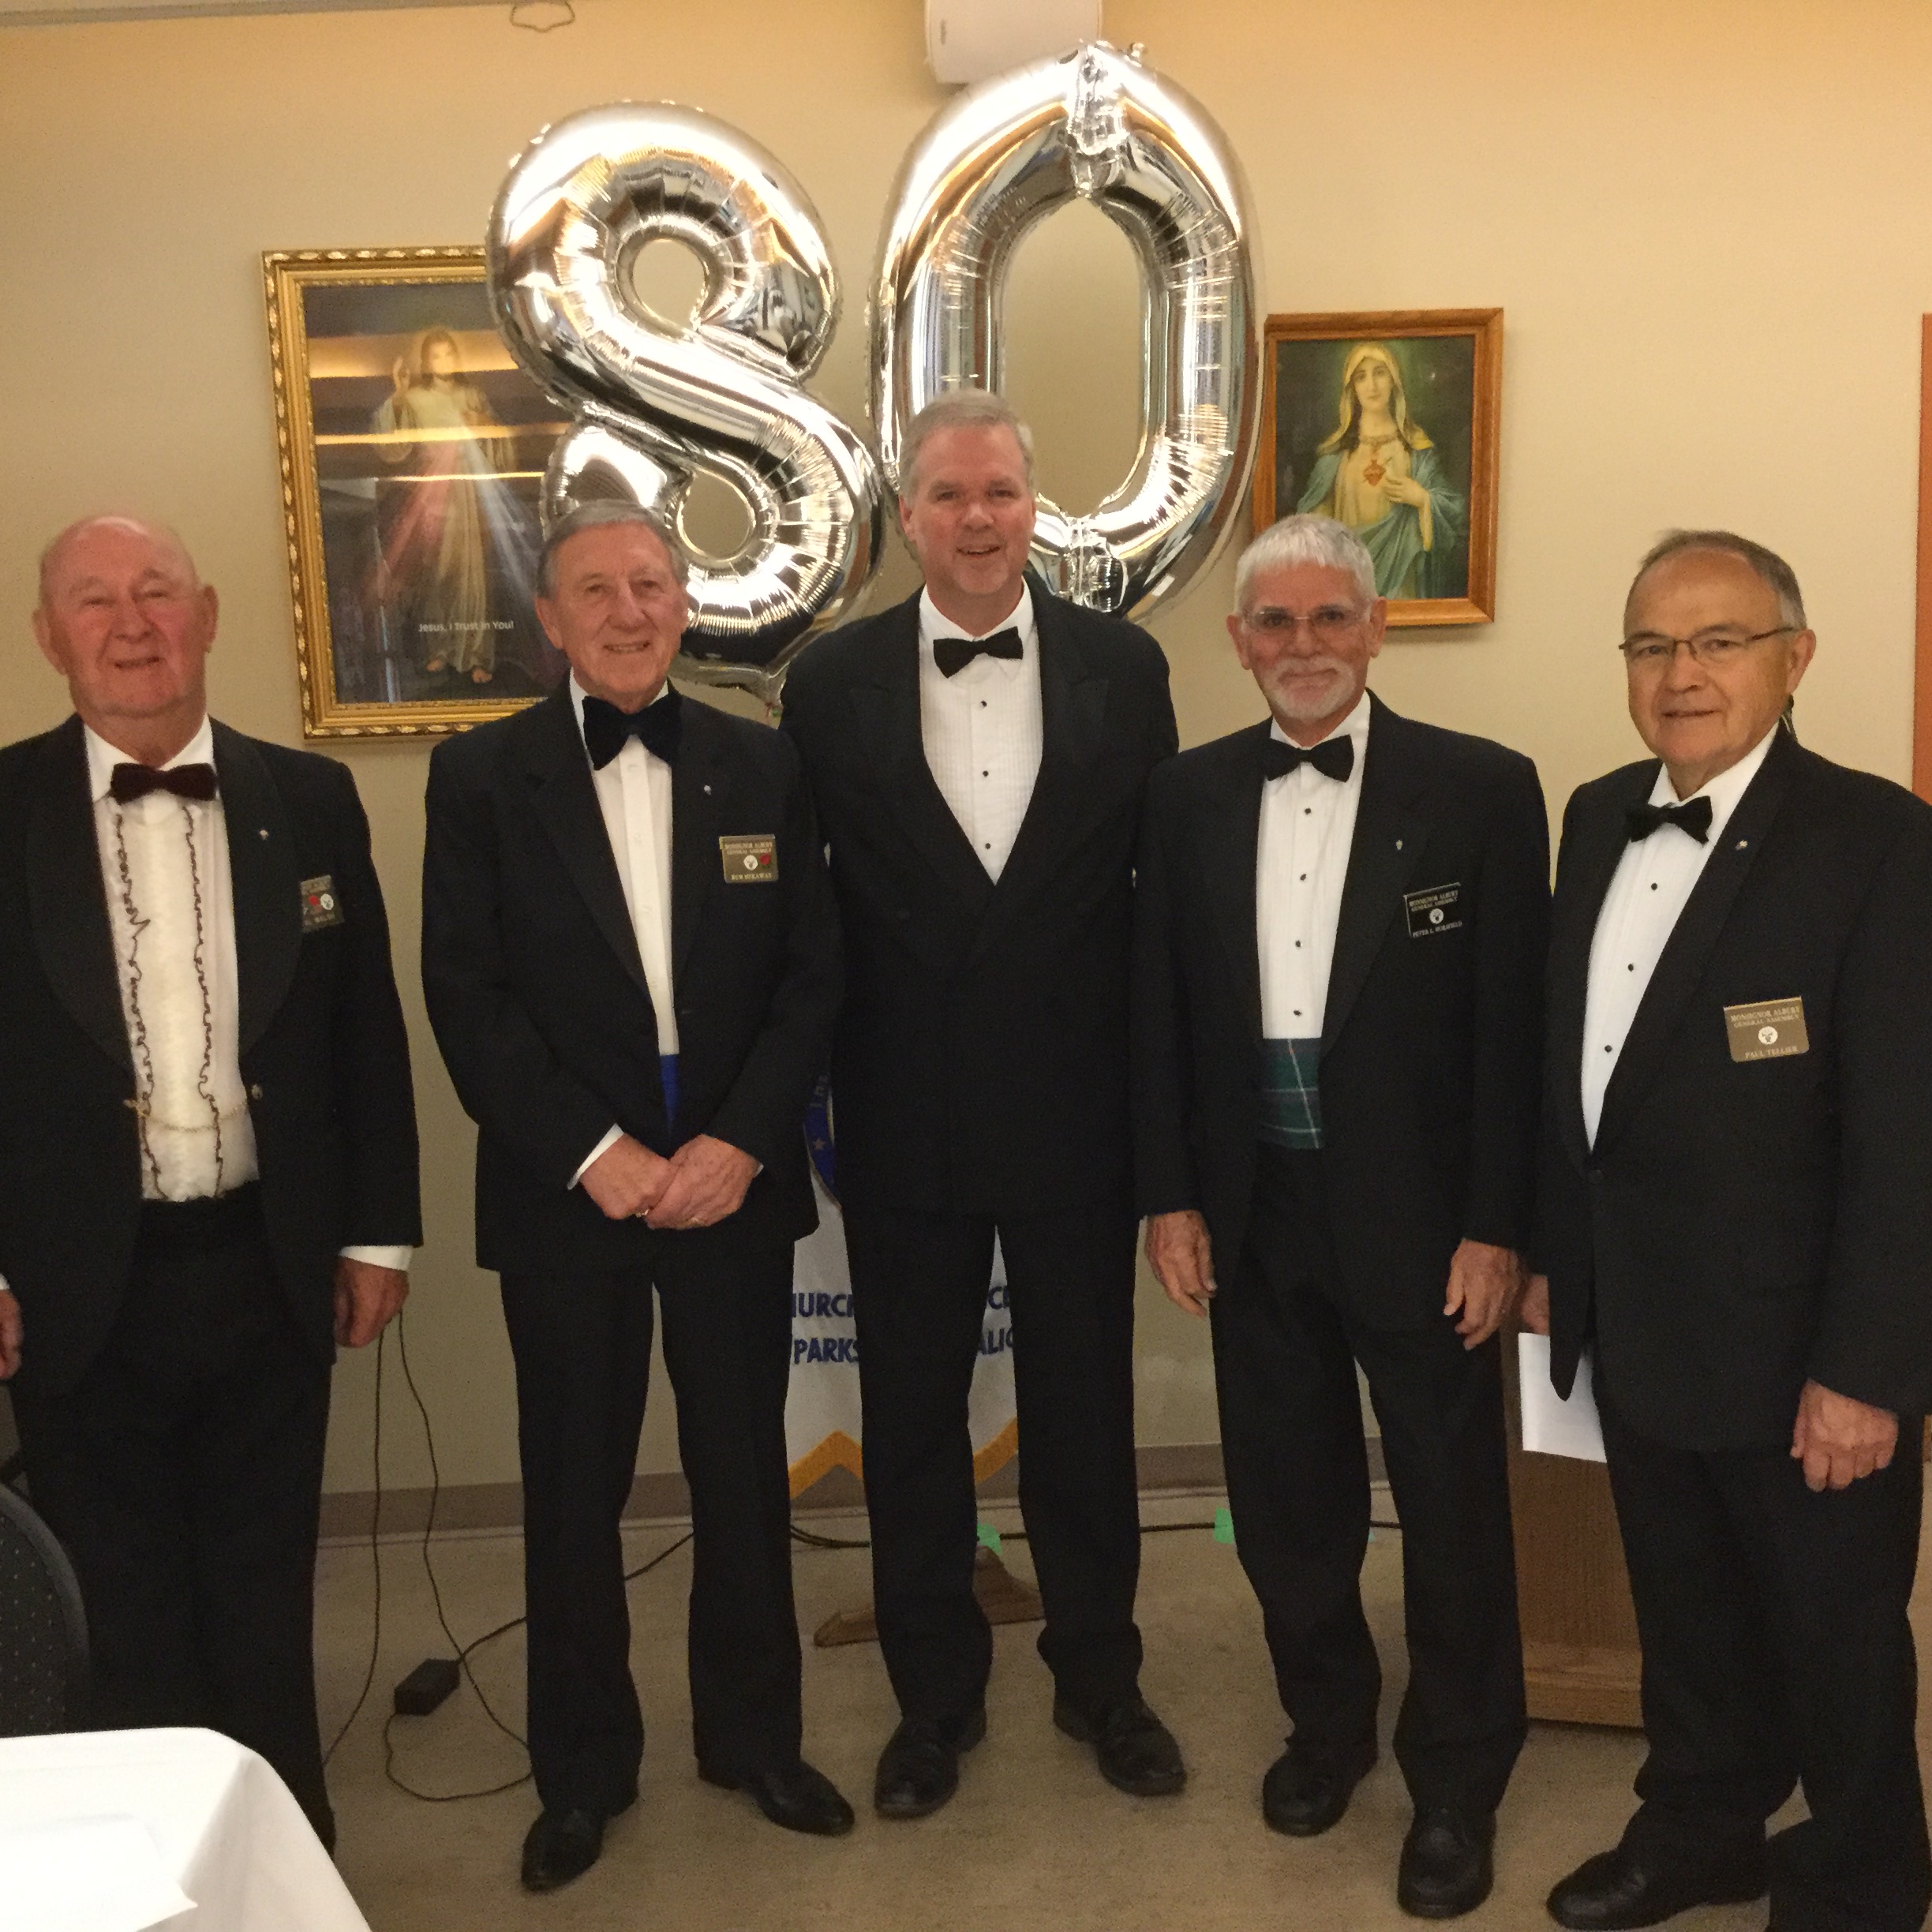 The Knights of Columbus were handsome escorts and servers